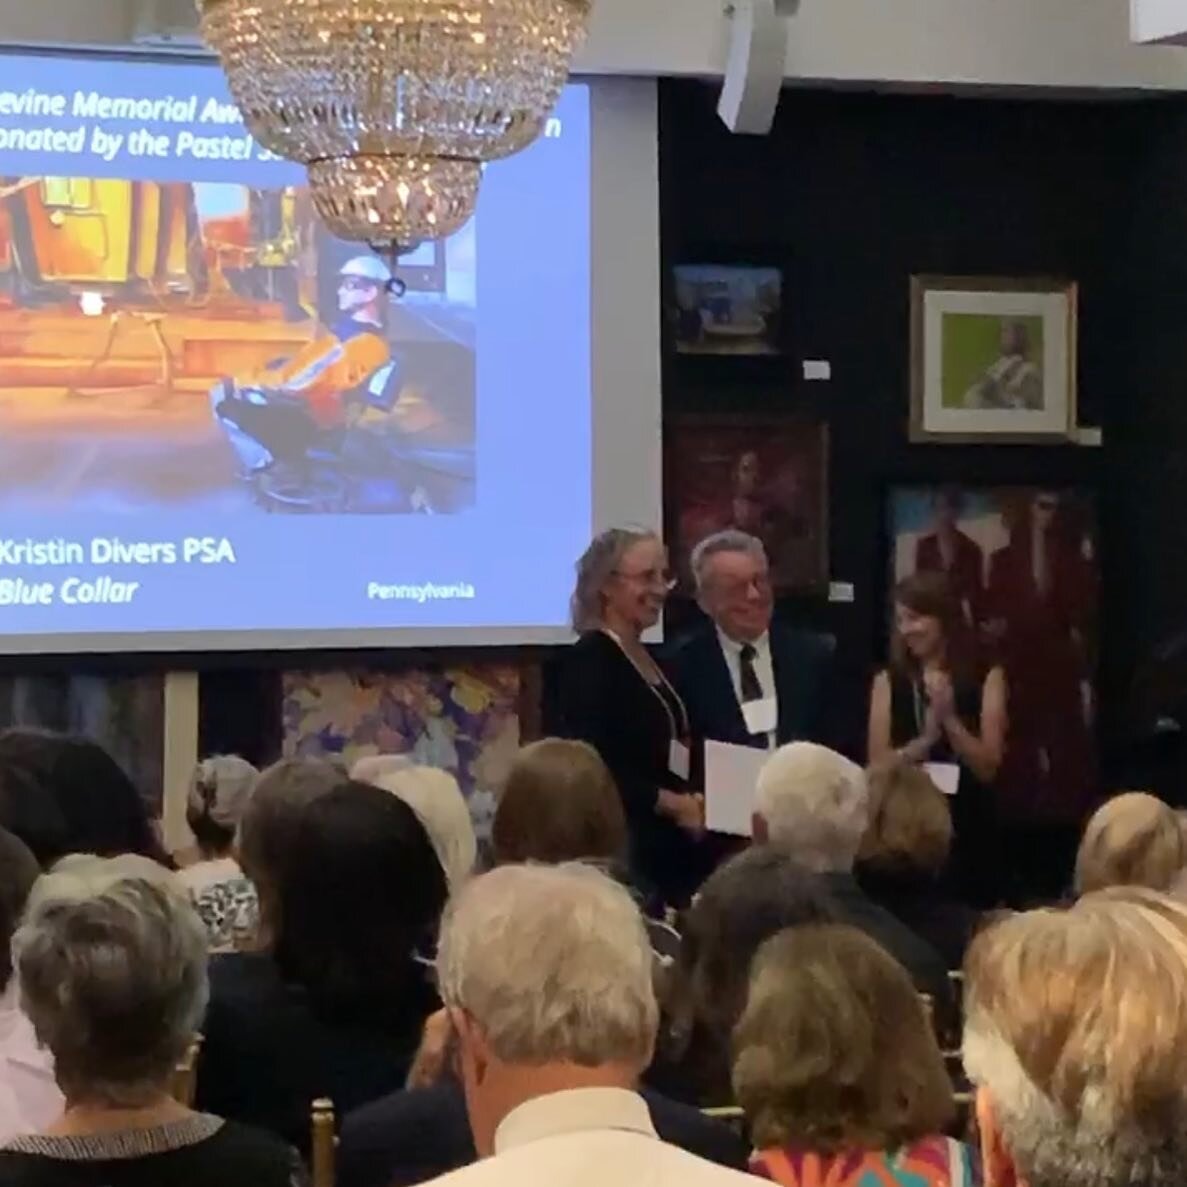 @jimboalley presented me with the Marge Levine Memorial Award for Creative Innovation last night at the Pastel Society of America&rsquo;s annual exhibit in New York. It&rsquo;s a thrill to be recognized for my work and an honor to stand beside such a